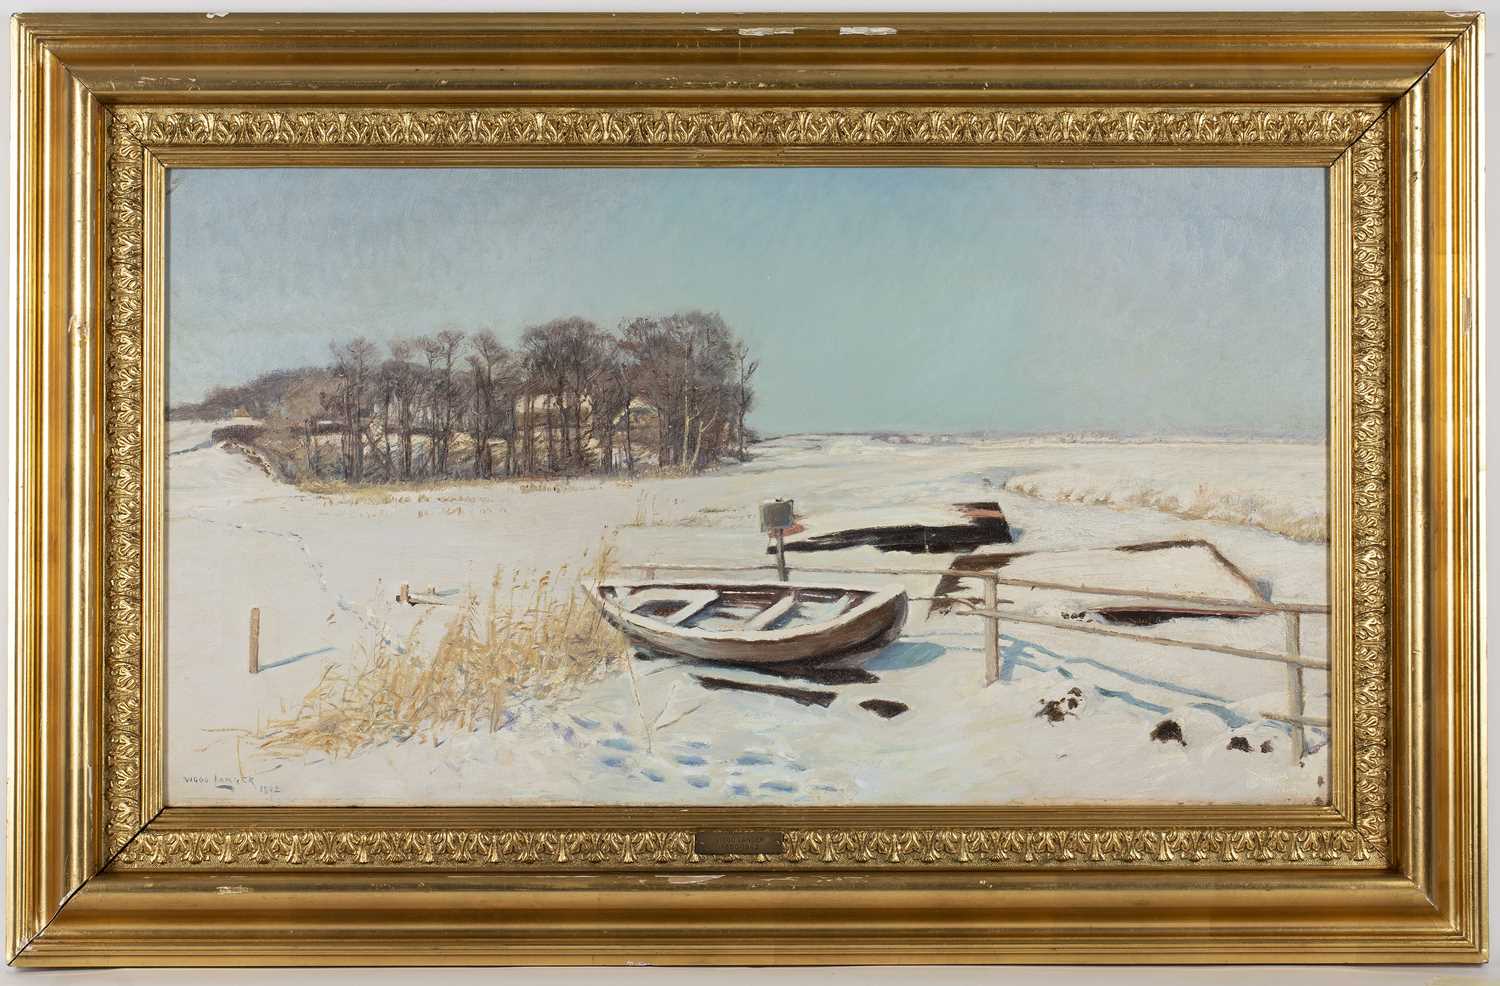 Olaf Viggo Peter Langer (1860-1942) Winter Time, signed and dated 1892, oil on canvas, 46 x 84cm - Image 2 of 3